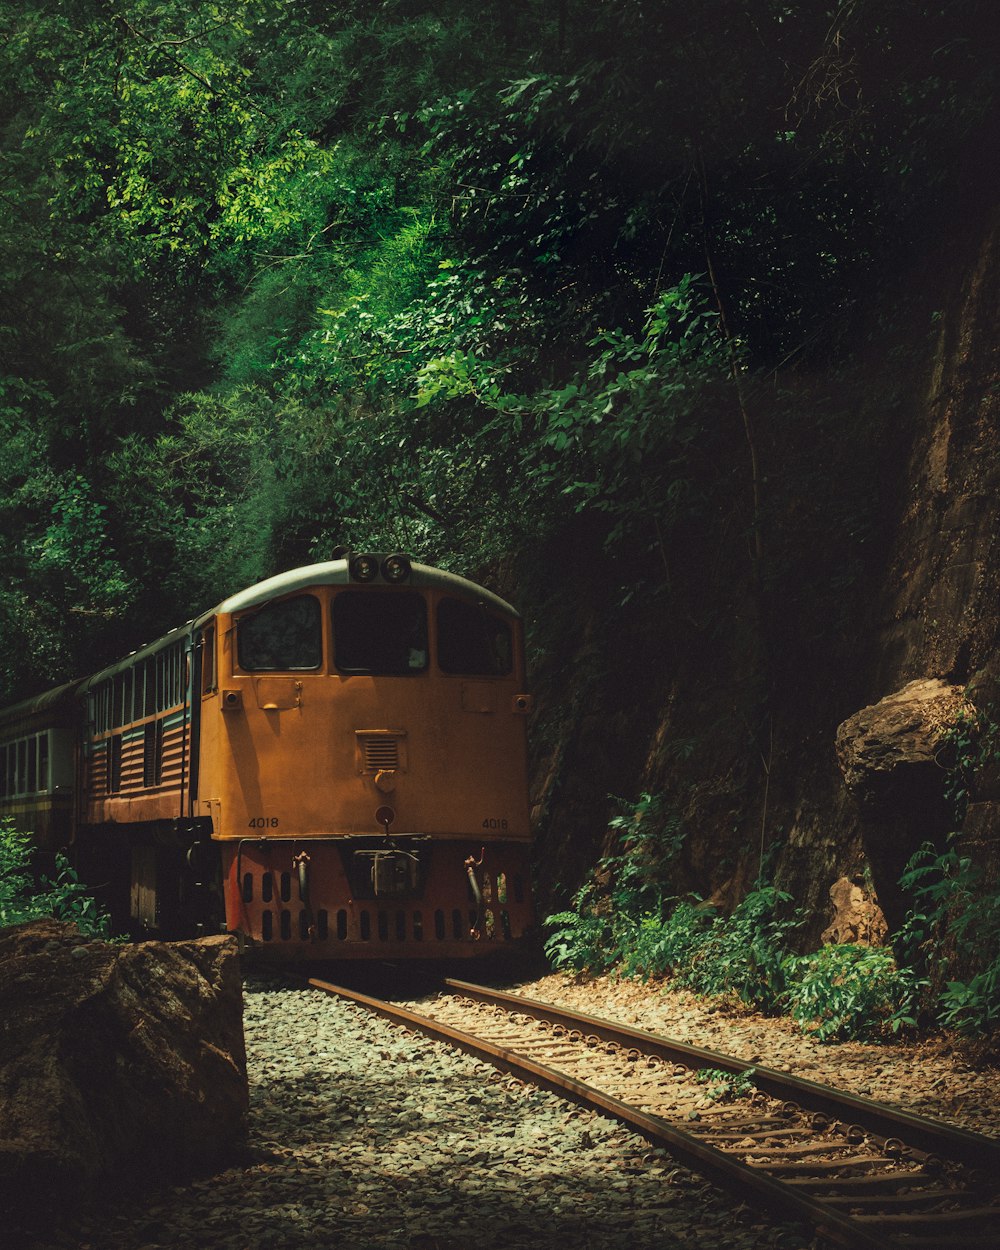 yellow train in the middle of the forest